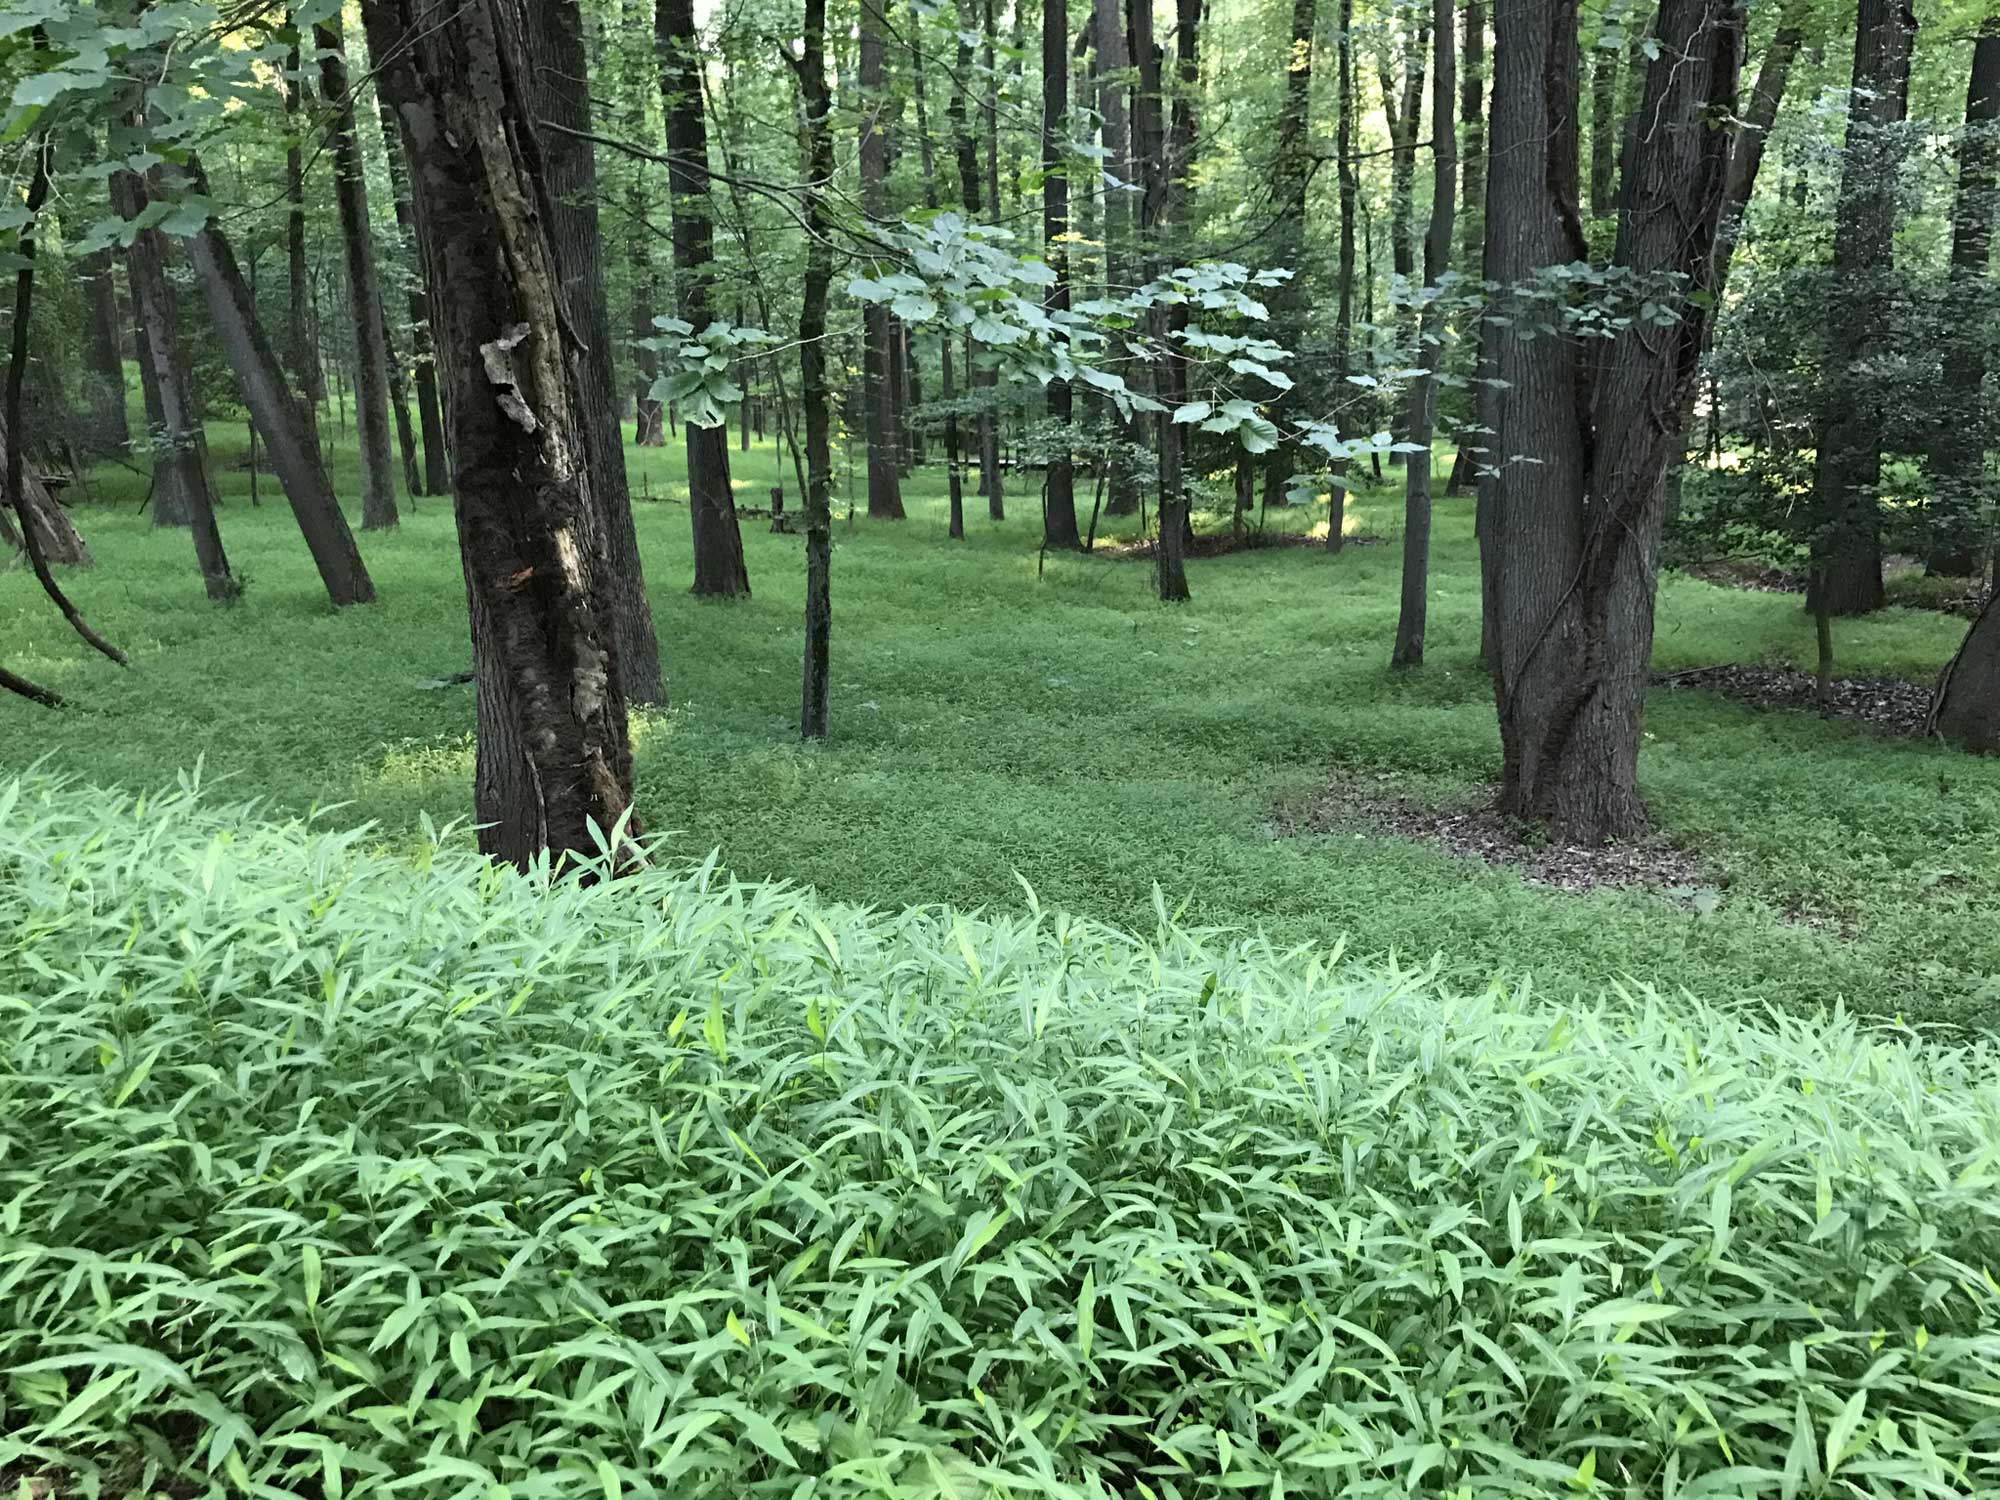 Photograph of Japanese stiltgrass growing in a forest in Maryland, U.S.A. The photo shows a grass with strap-shaped leaves completely carpeting the forest floor, with the brown trunks of trees rising above.